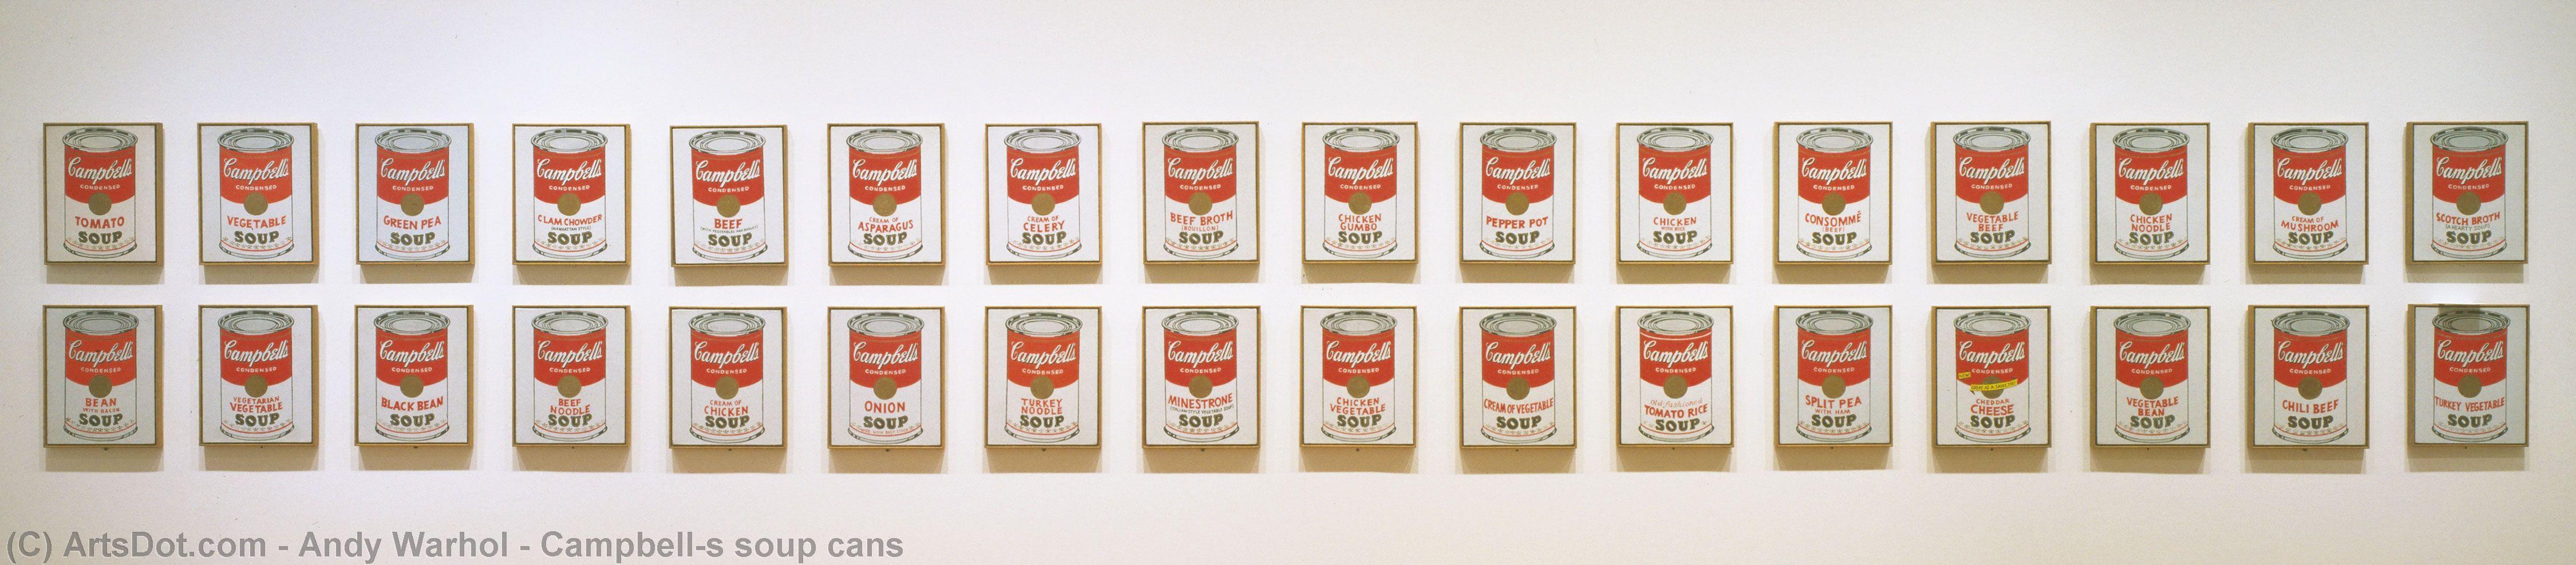 WikiOO.org - Encyclopedia of Fine Arts - Malba, Artwork Andy Warhol - Campbell's soup cans